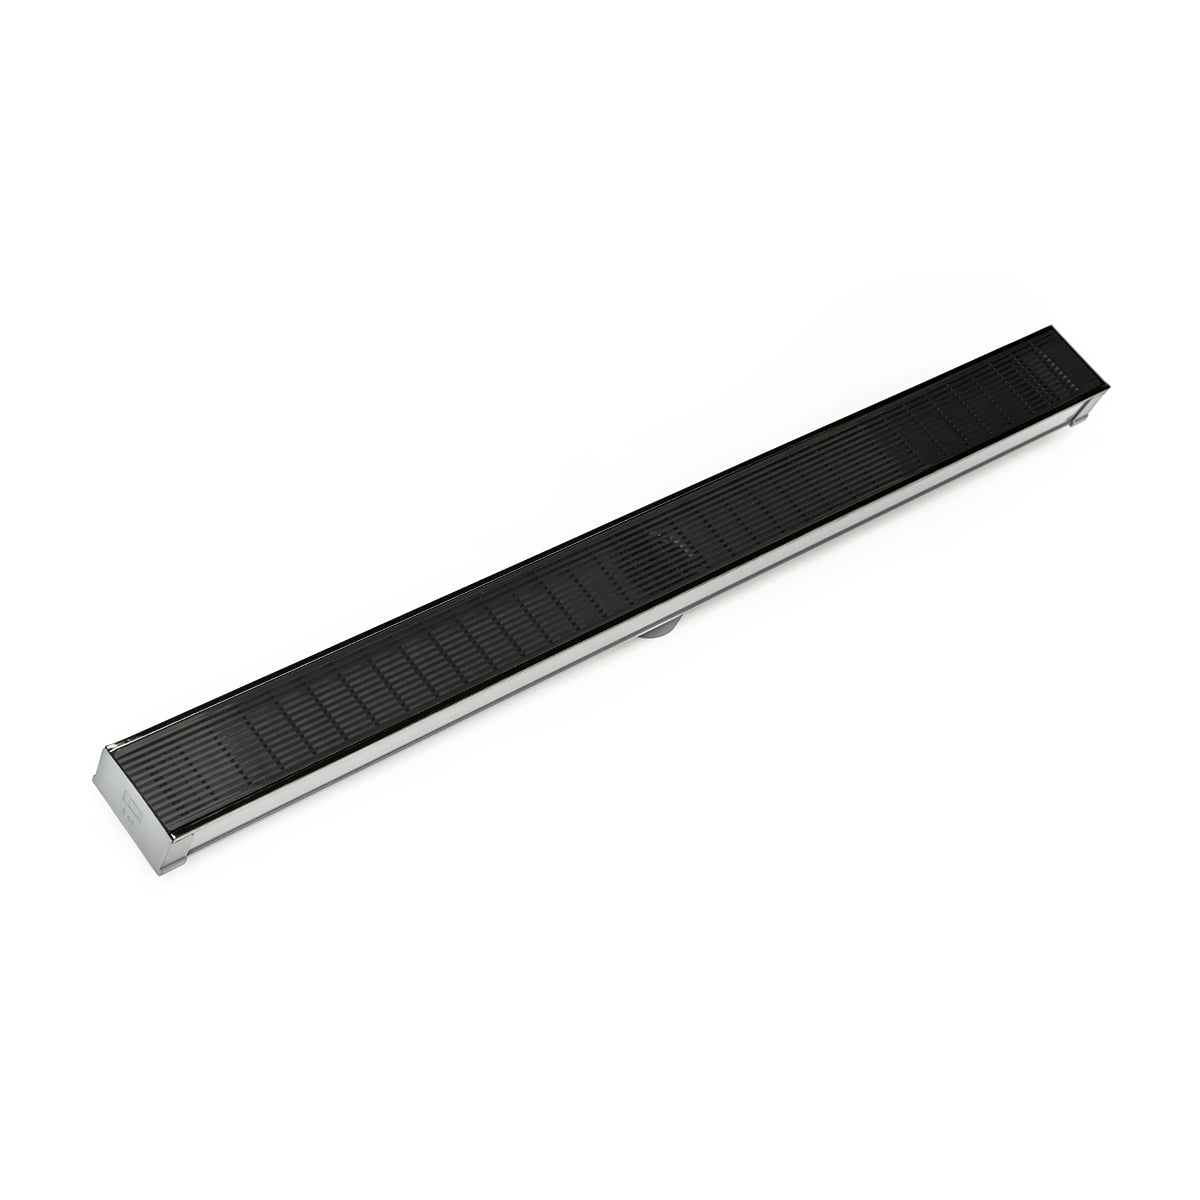 Infinity Drain 96" S-PVC Series Low Profile Site Sizable Linear Drain Kit with 2 1/2" Wedge Wire Grate